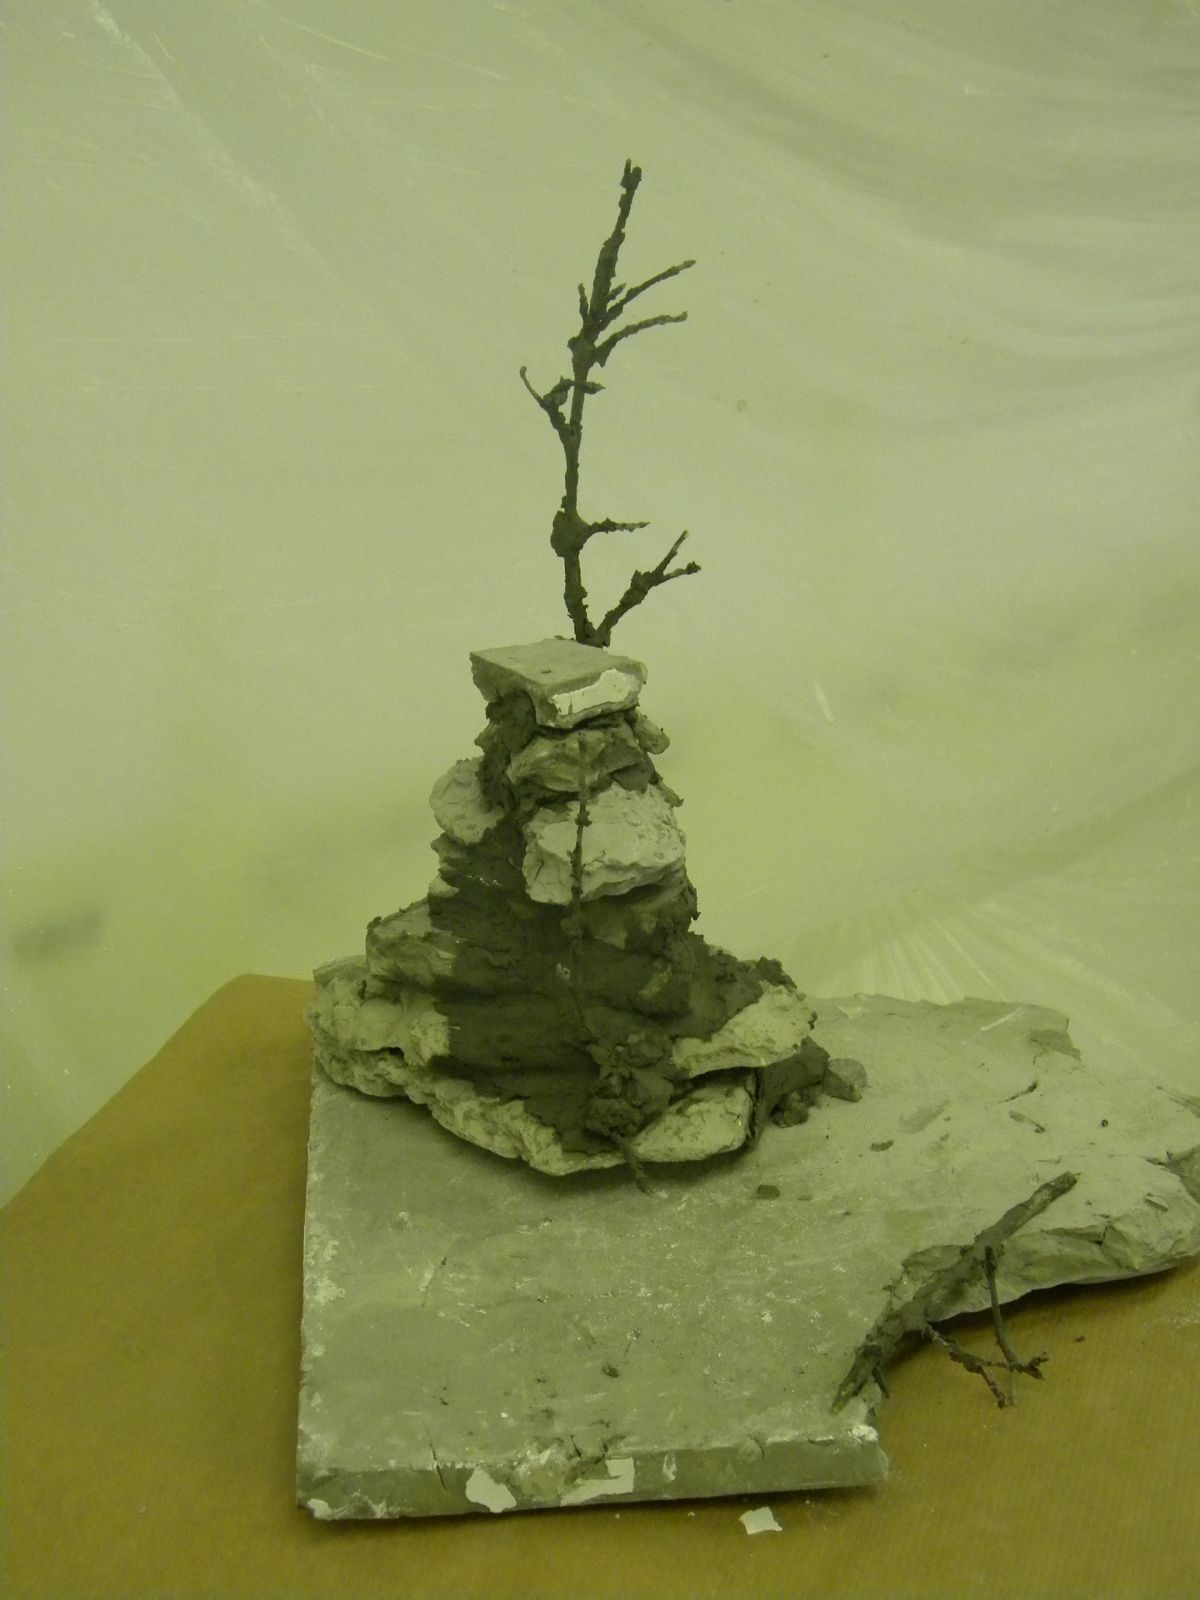 How to econvey a feeling about something you love to do? A 4th year sculptural project.